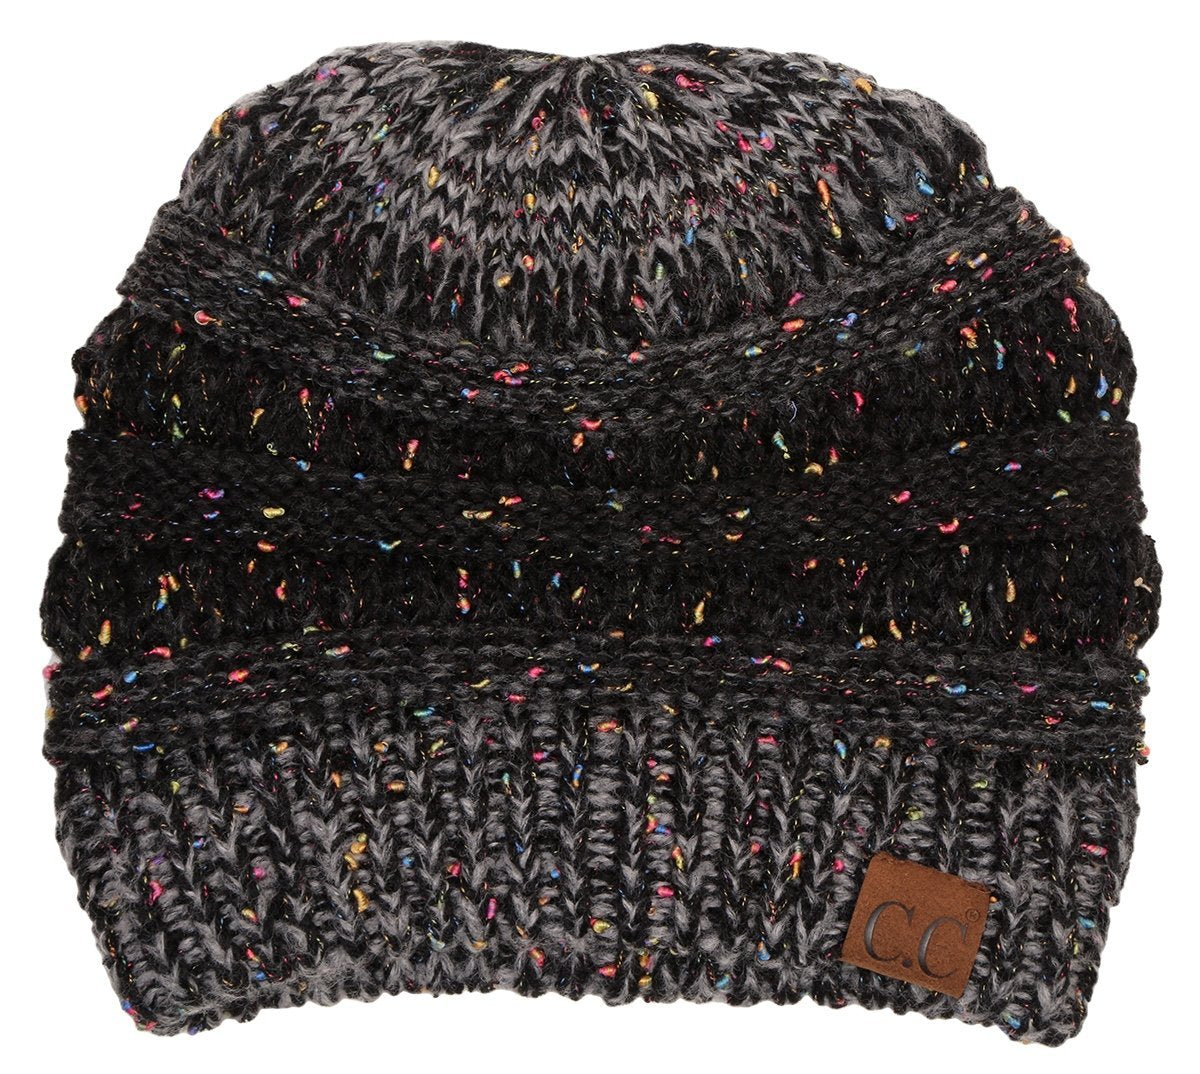 Confetti Knit Beanie by Funky Junque